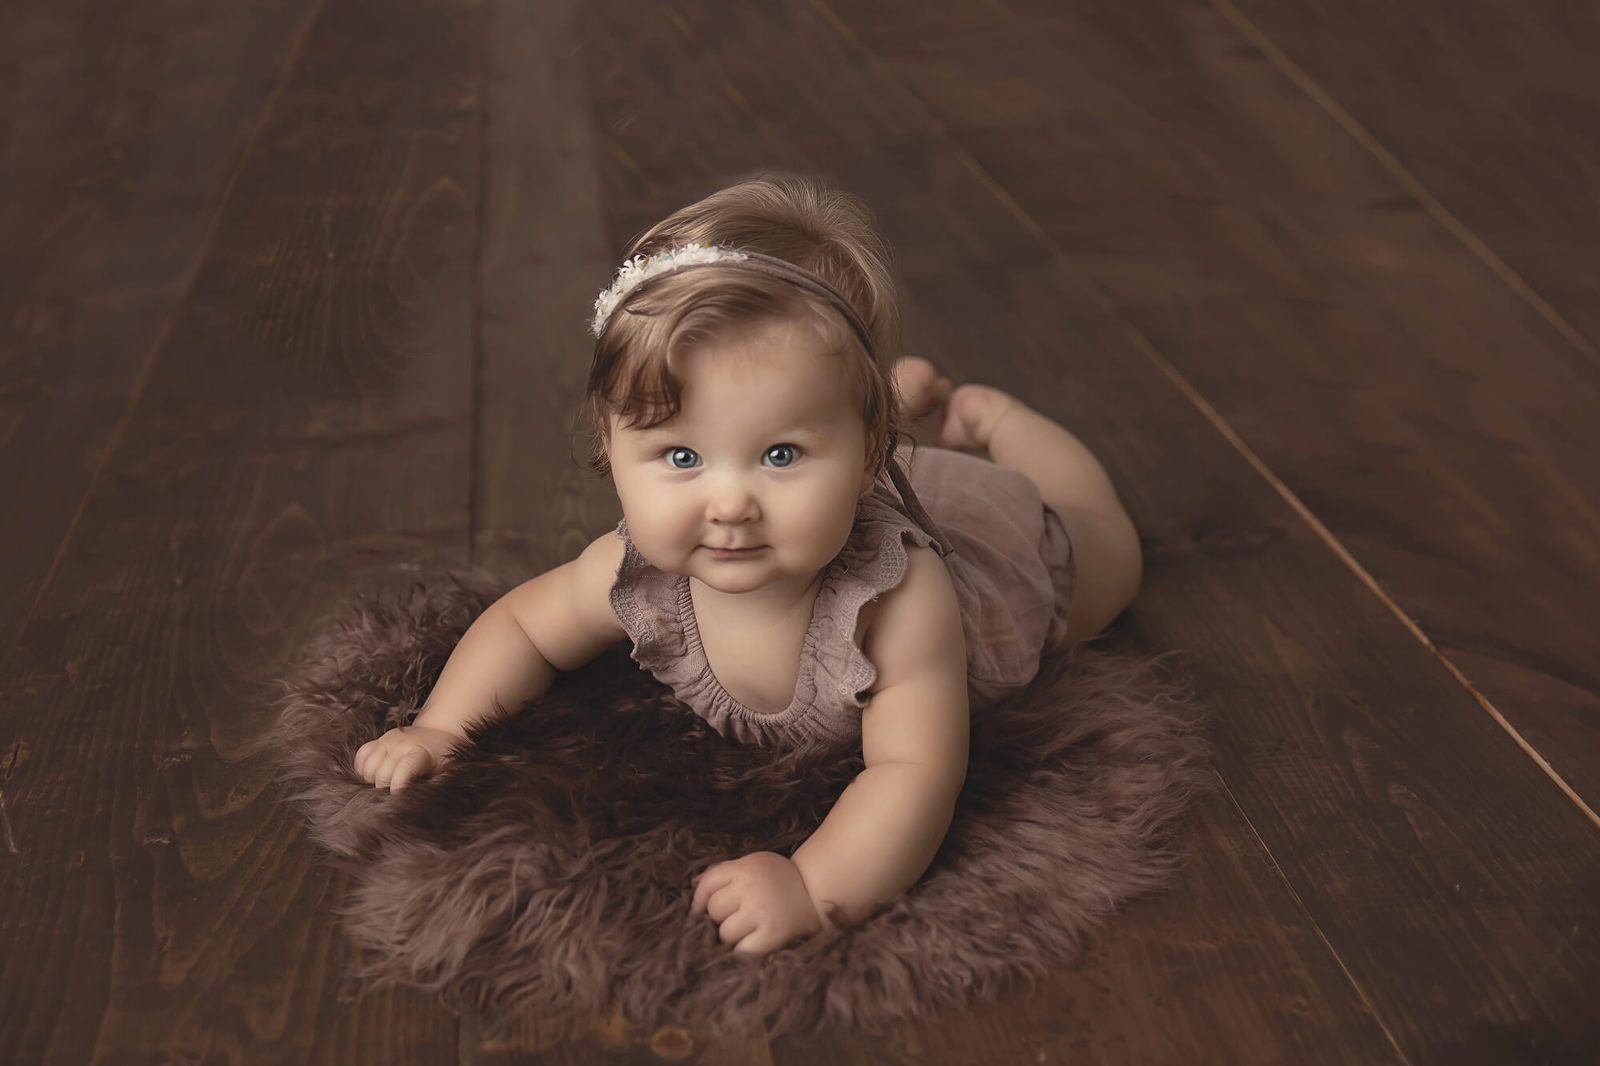 best louisville baby photographer, Louisville cake smash photographer, cake smash photography near me, new albany indiana baby photographer, professional baby photos